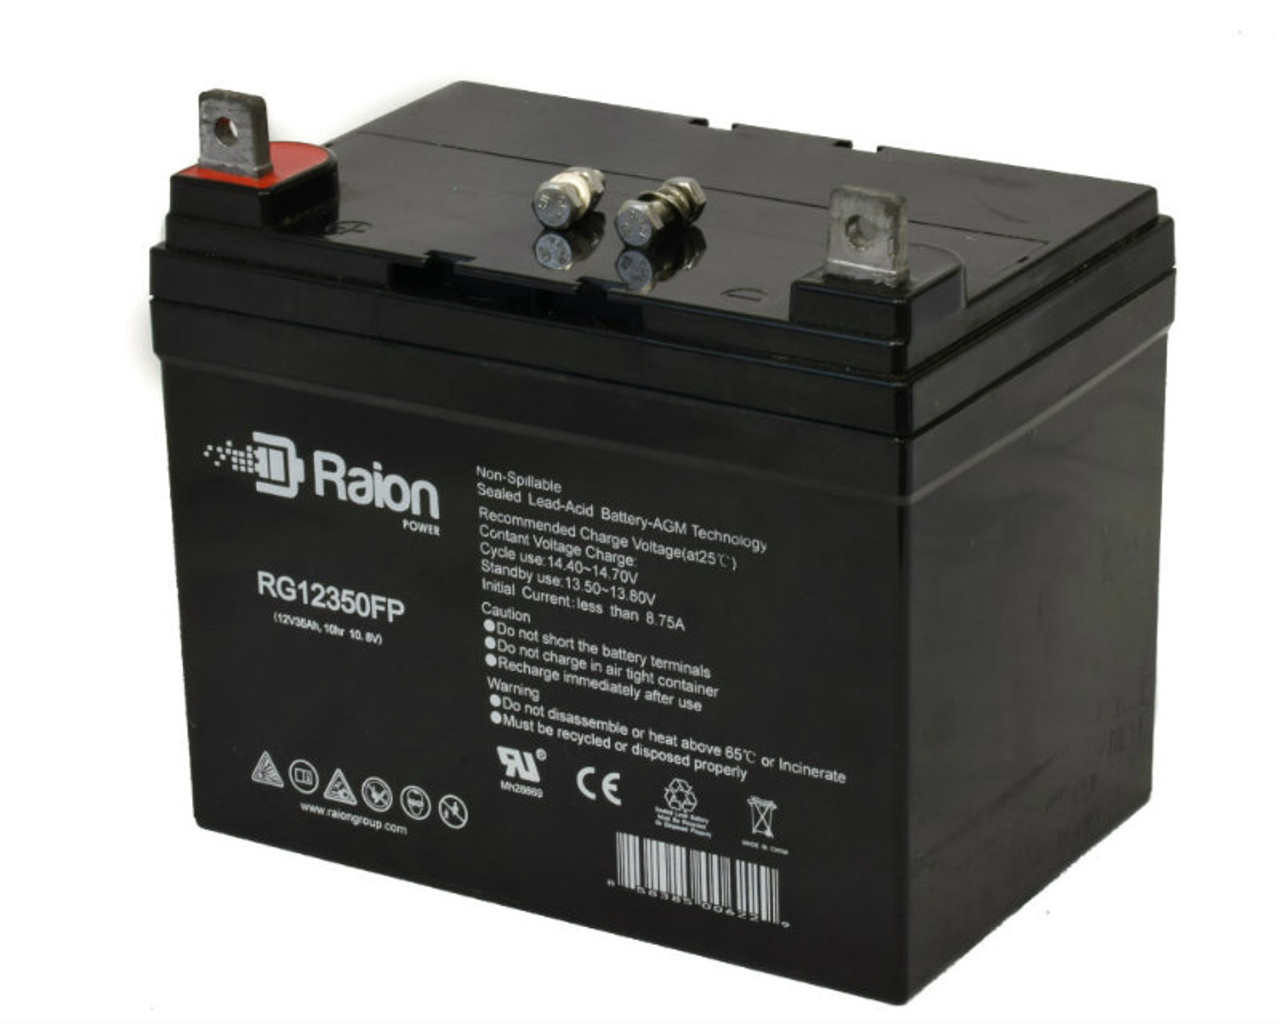 Raion Power Replacement 12V 35Ah Battery for Ariens/Gravely 2200 - 1 Pack